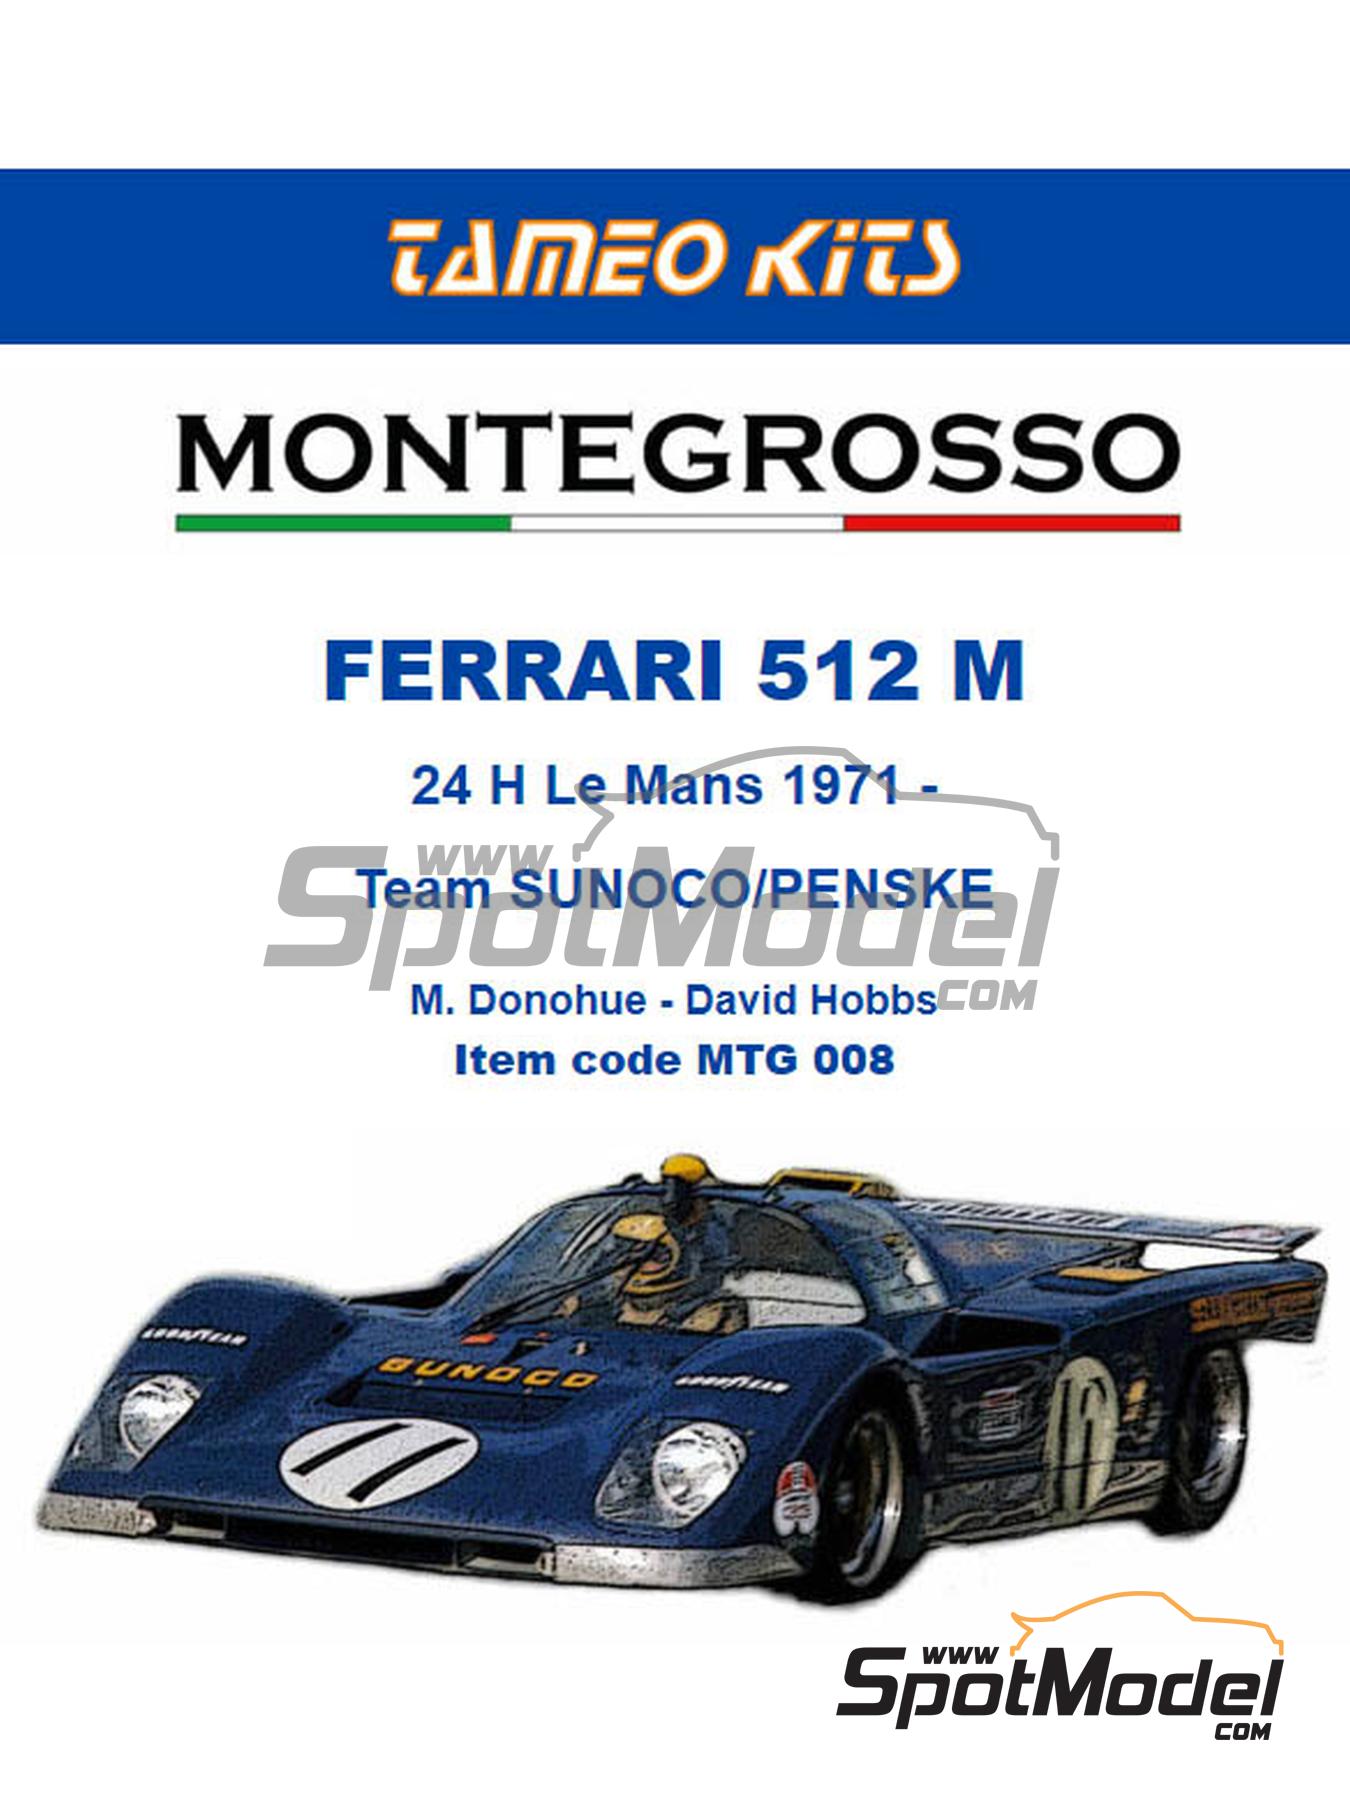 Ferrari 512M Penske Team sponsored by Sunoco - 24 Hours Le Mans 1971. Car  scale model kit in 1/43 scale manufactured by Tameo Kits (ref. MTG008)